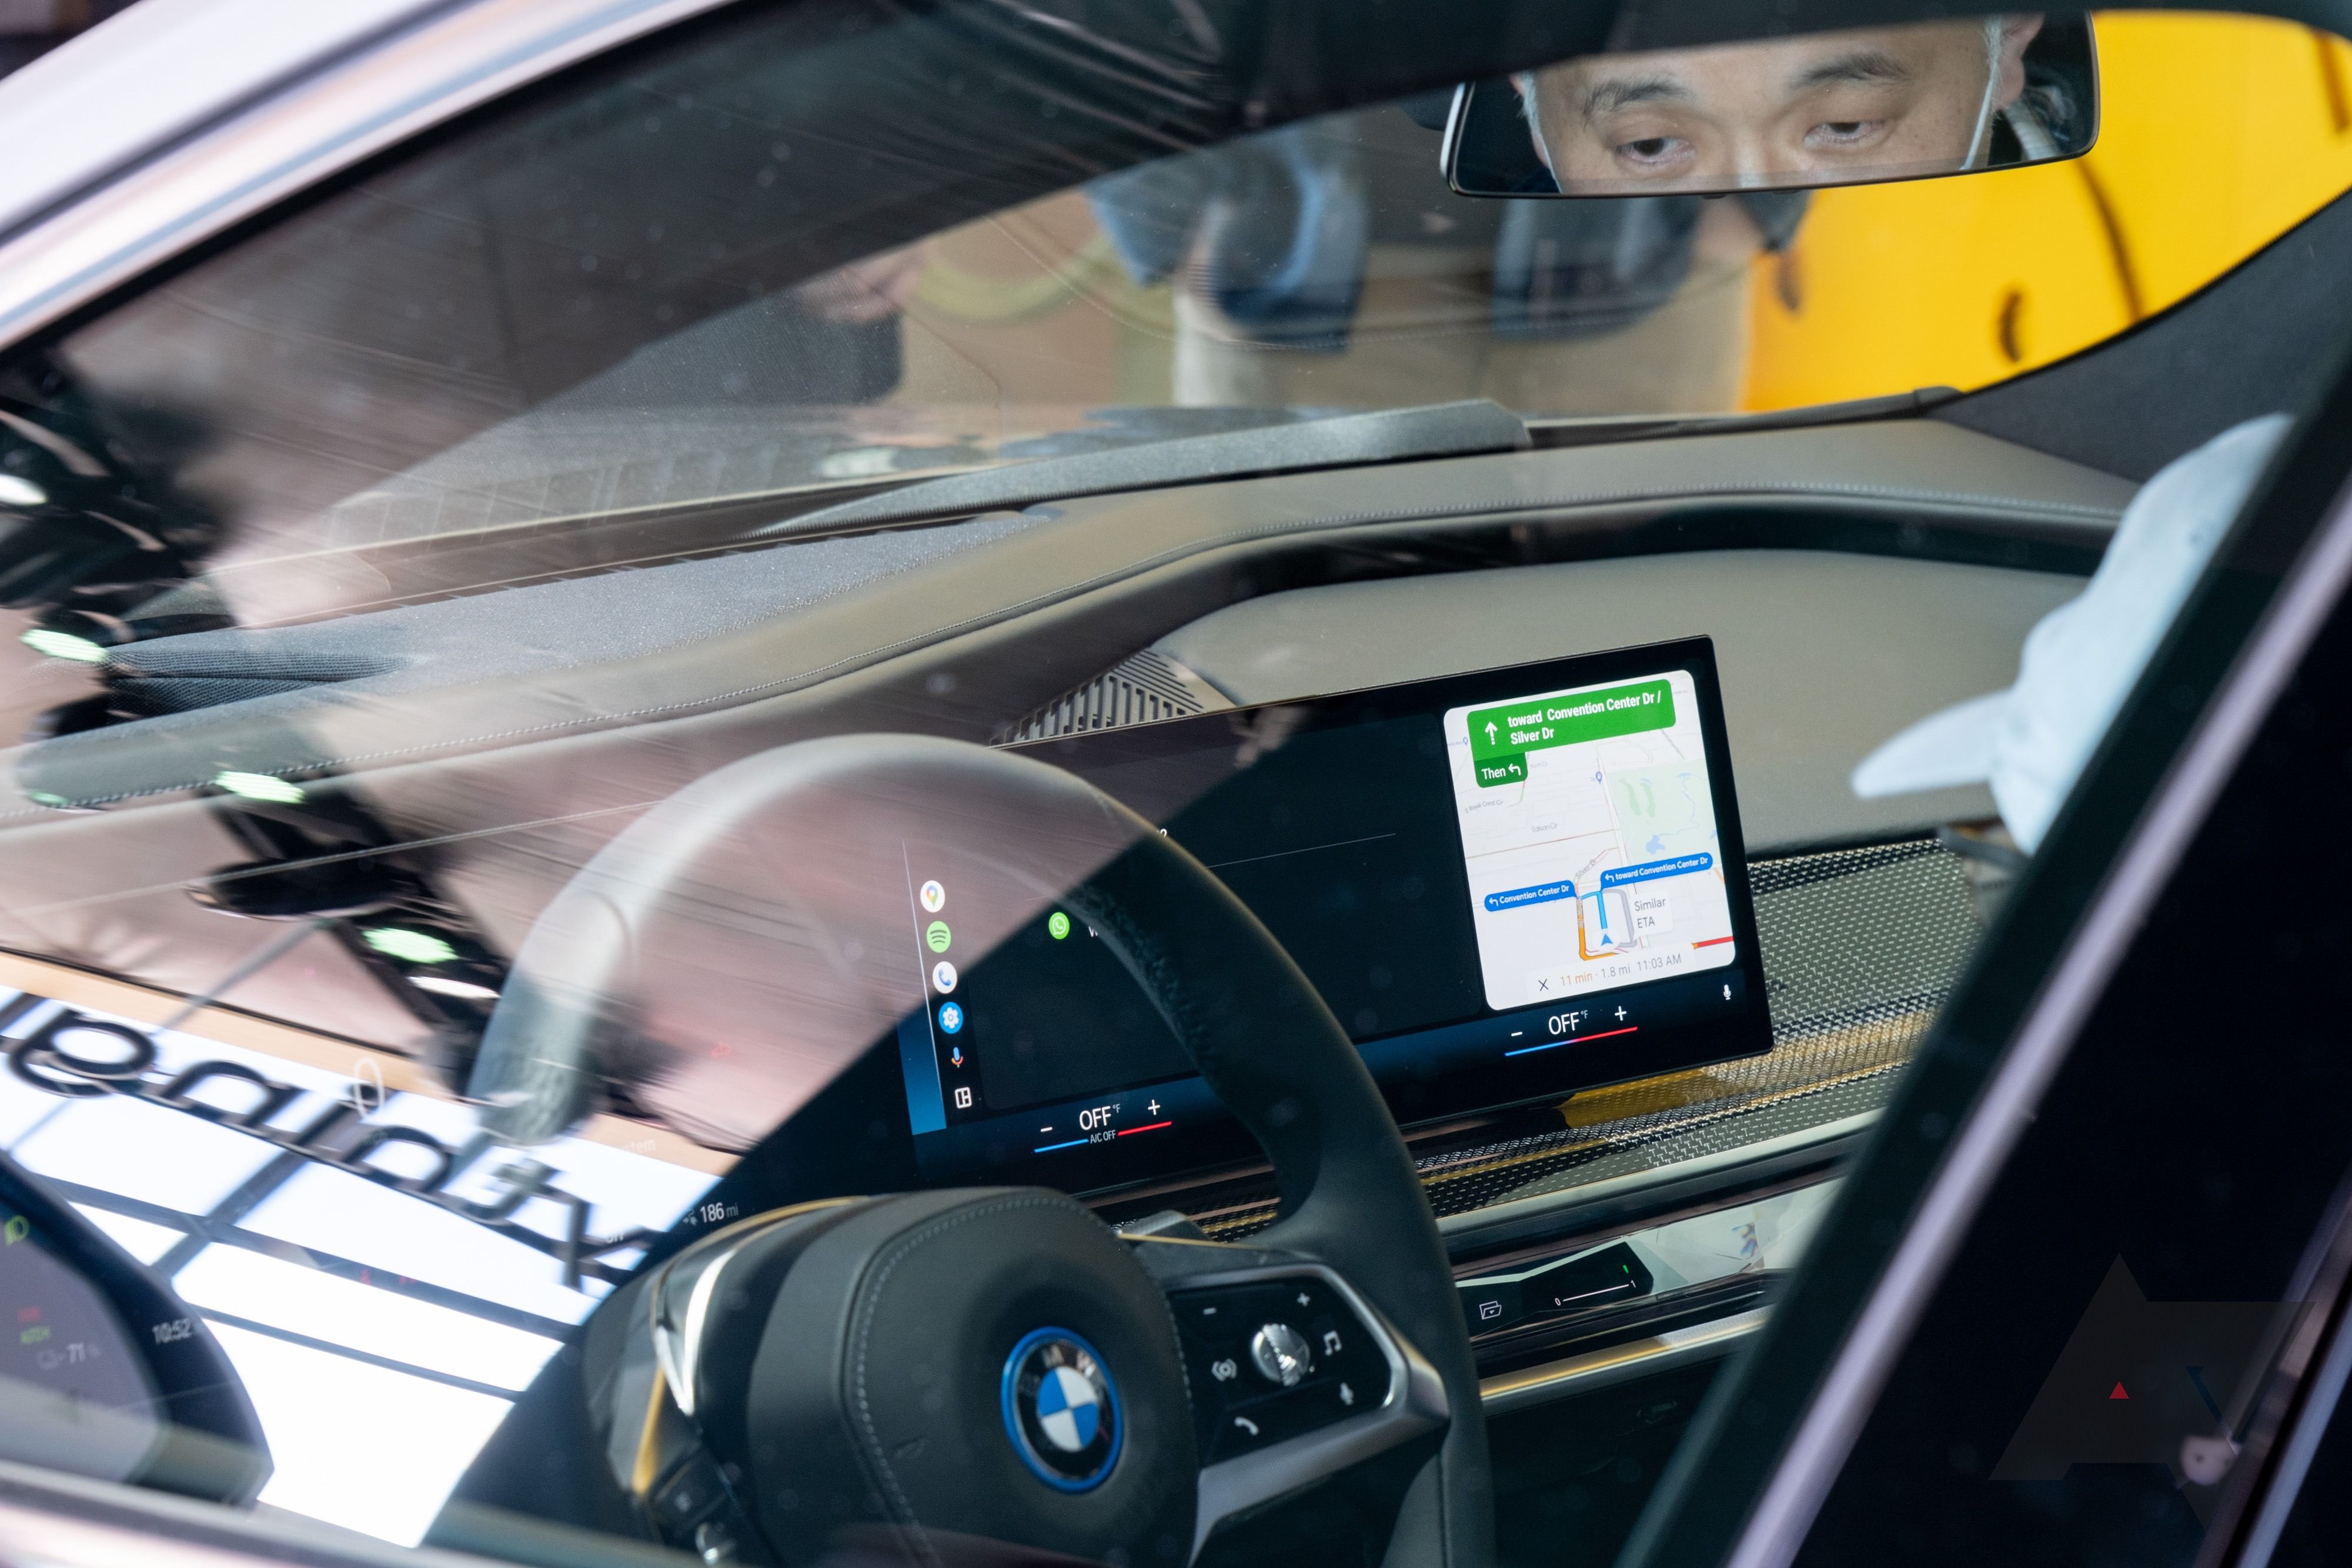 A car dashboard showing Android Auto on the screen